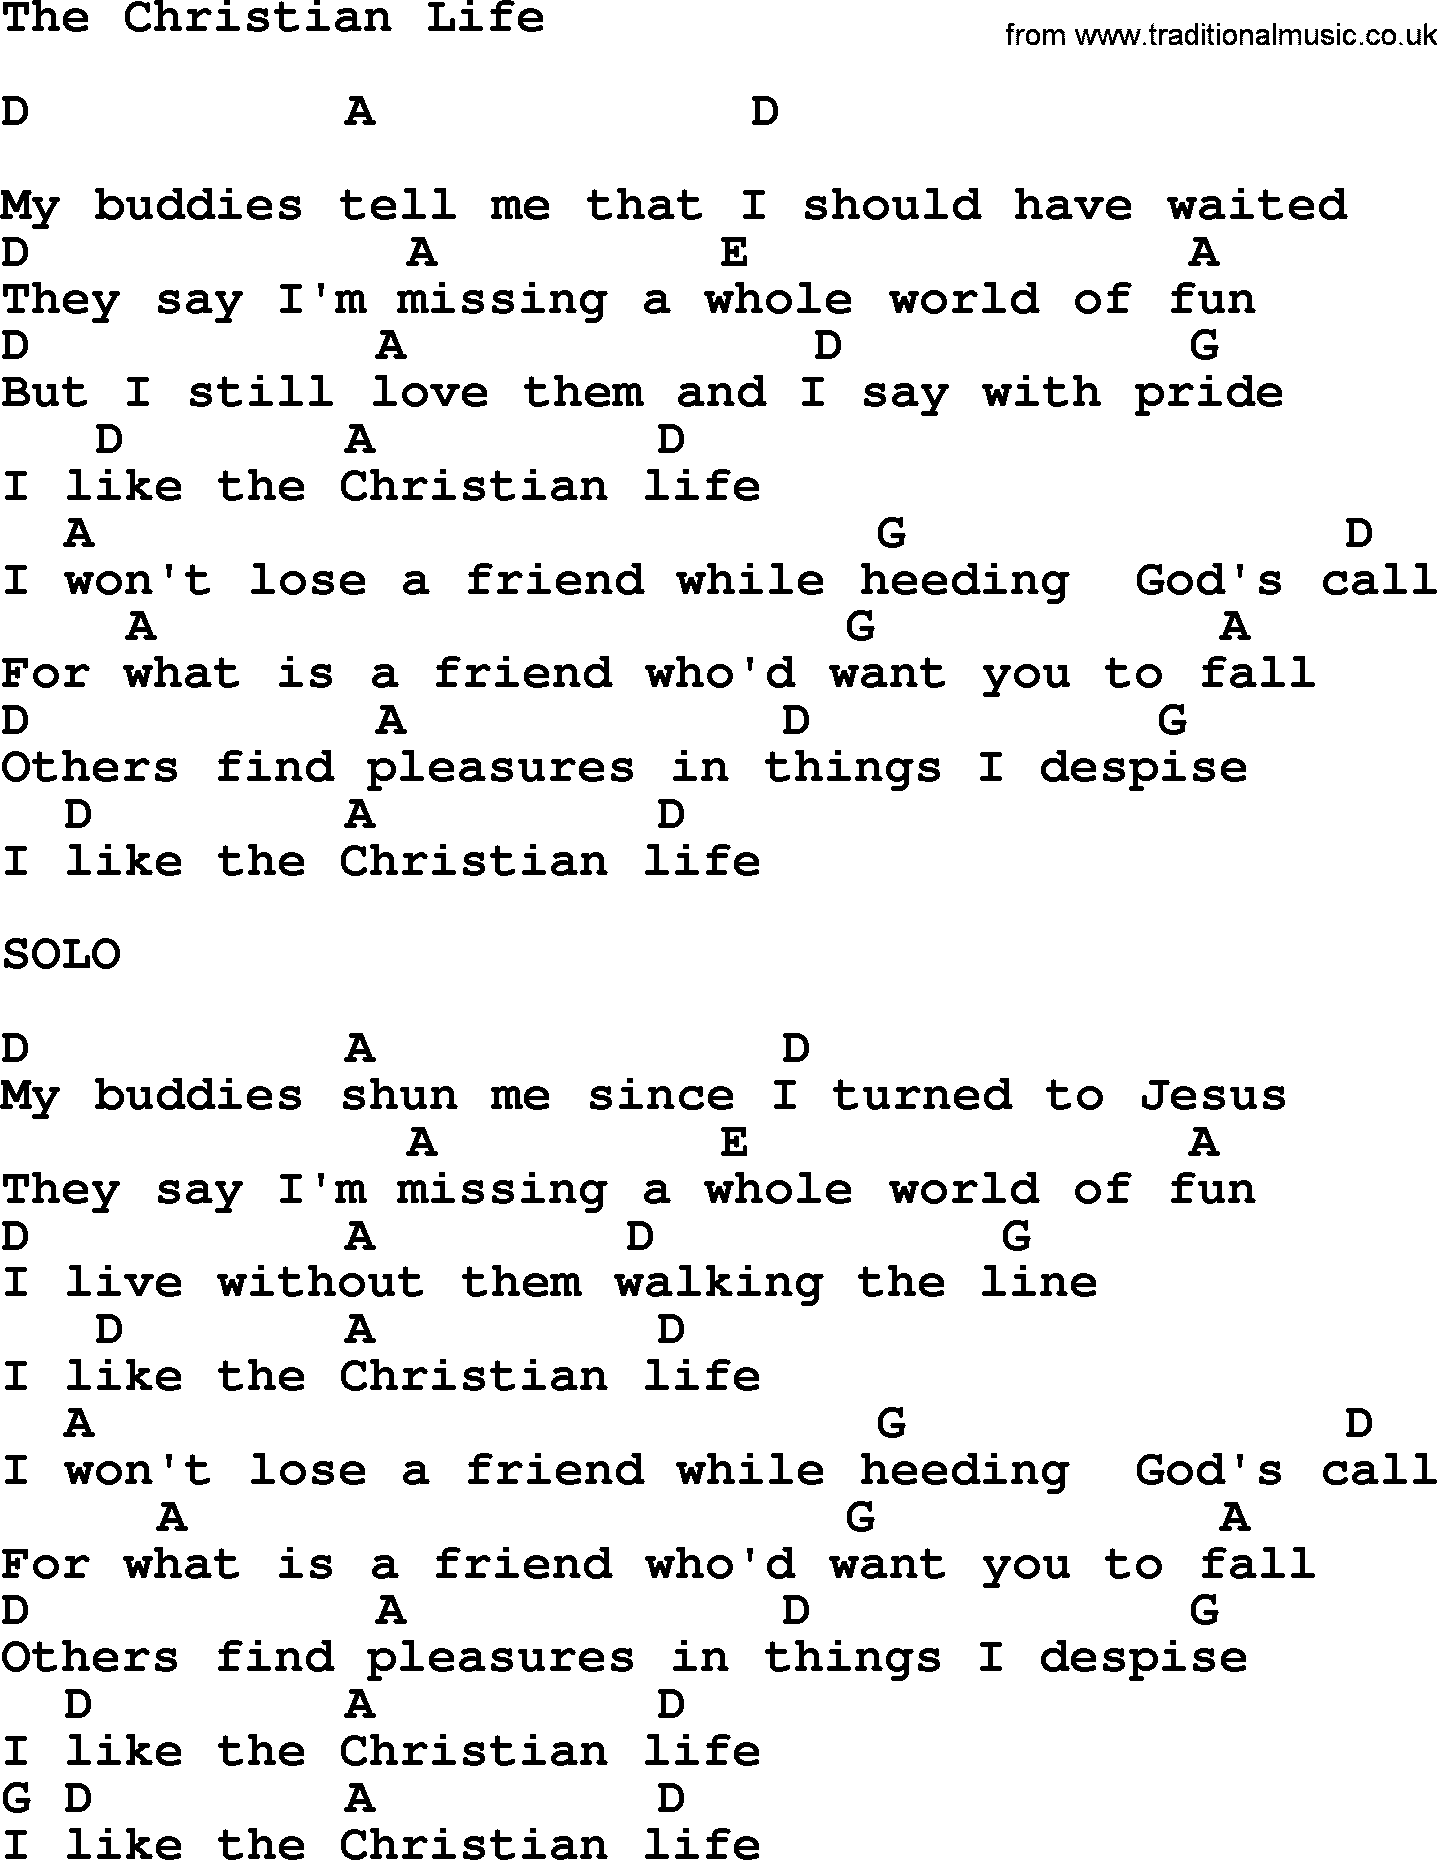 Bluegrass song: The Christian Life, lyrics and chords